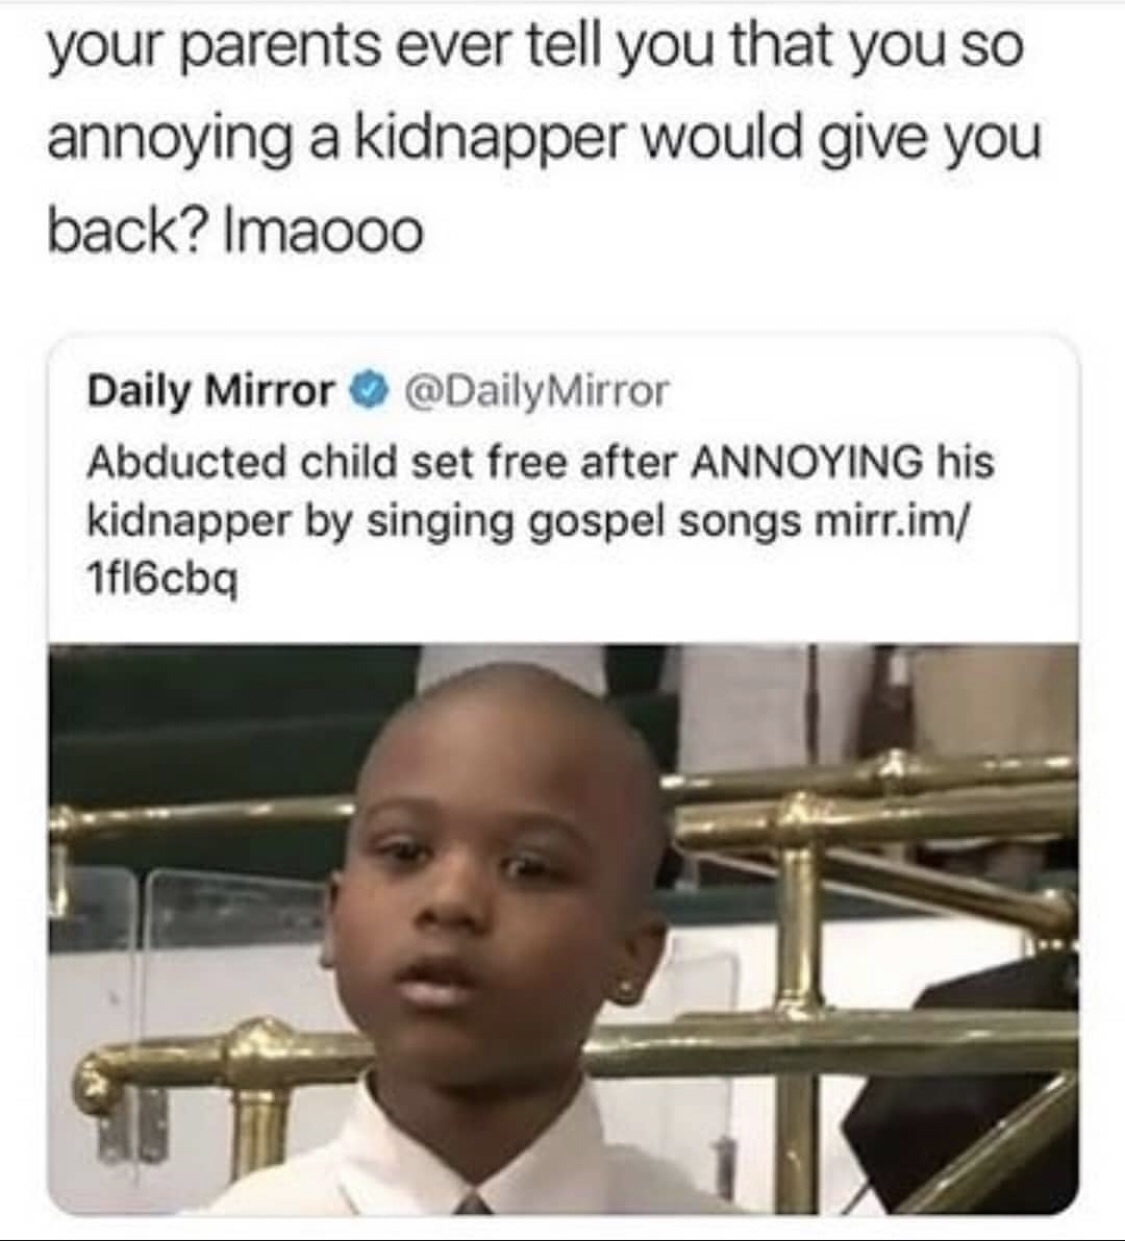 abducted child set free after annoying - your parents ever tell you that you so annoying a kidnapper would give you back? Imaooo Daily Mirror Mirror Abducted child set free after Annoying his kidnapper by singing gospel songs mirr.im 1f16cba